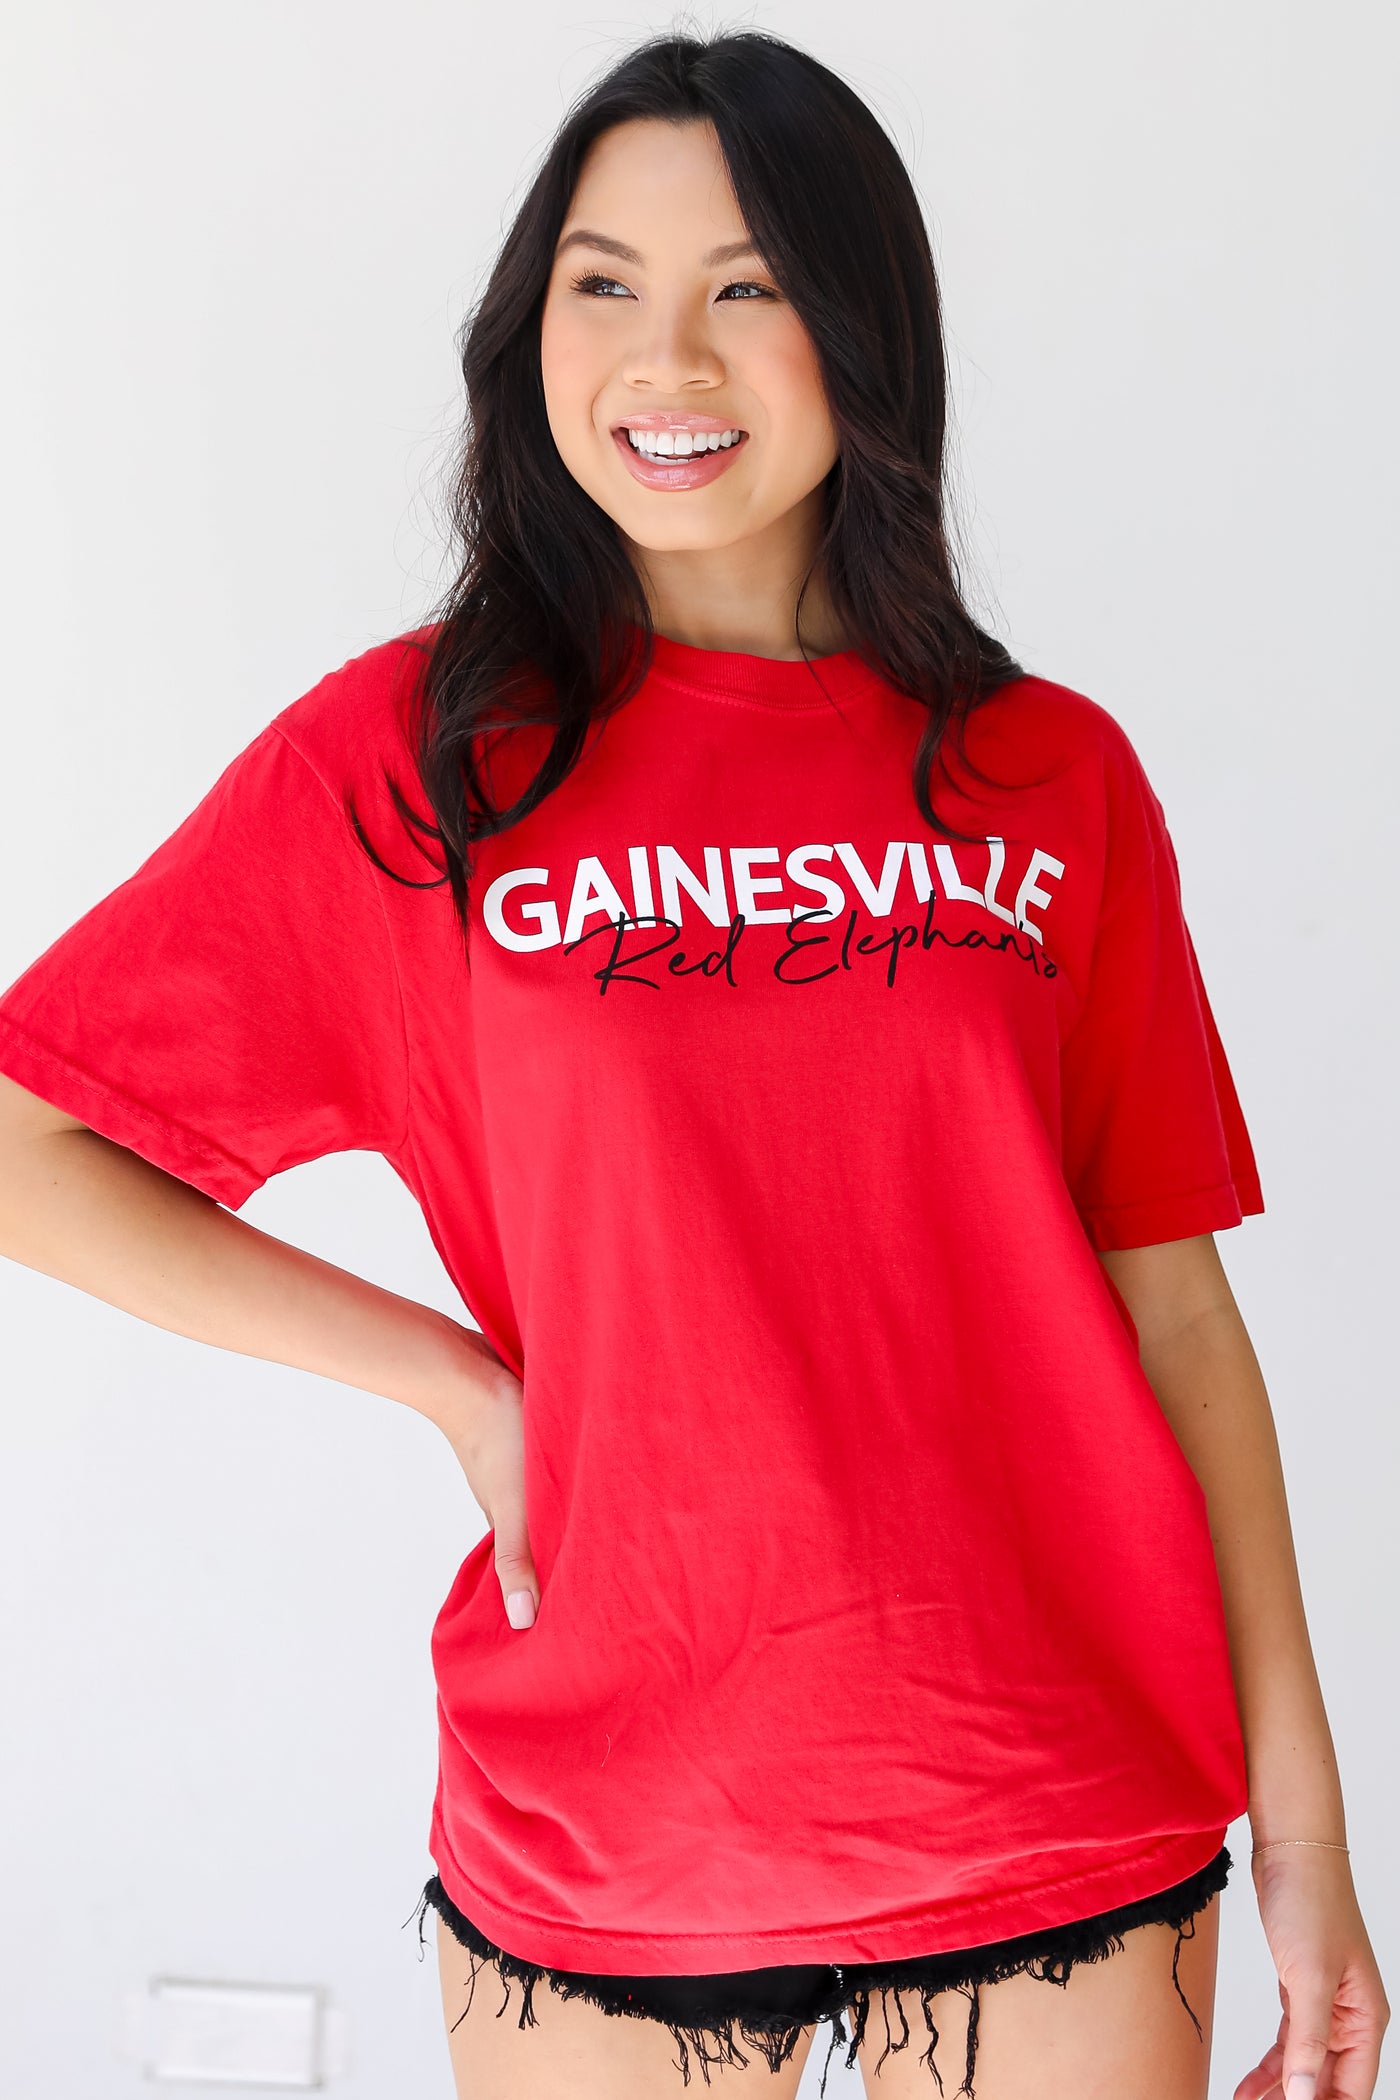 Gainesville Red Elephants Tee on model